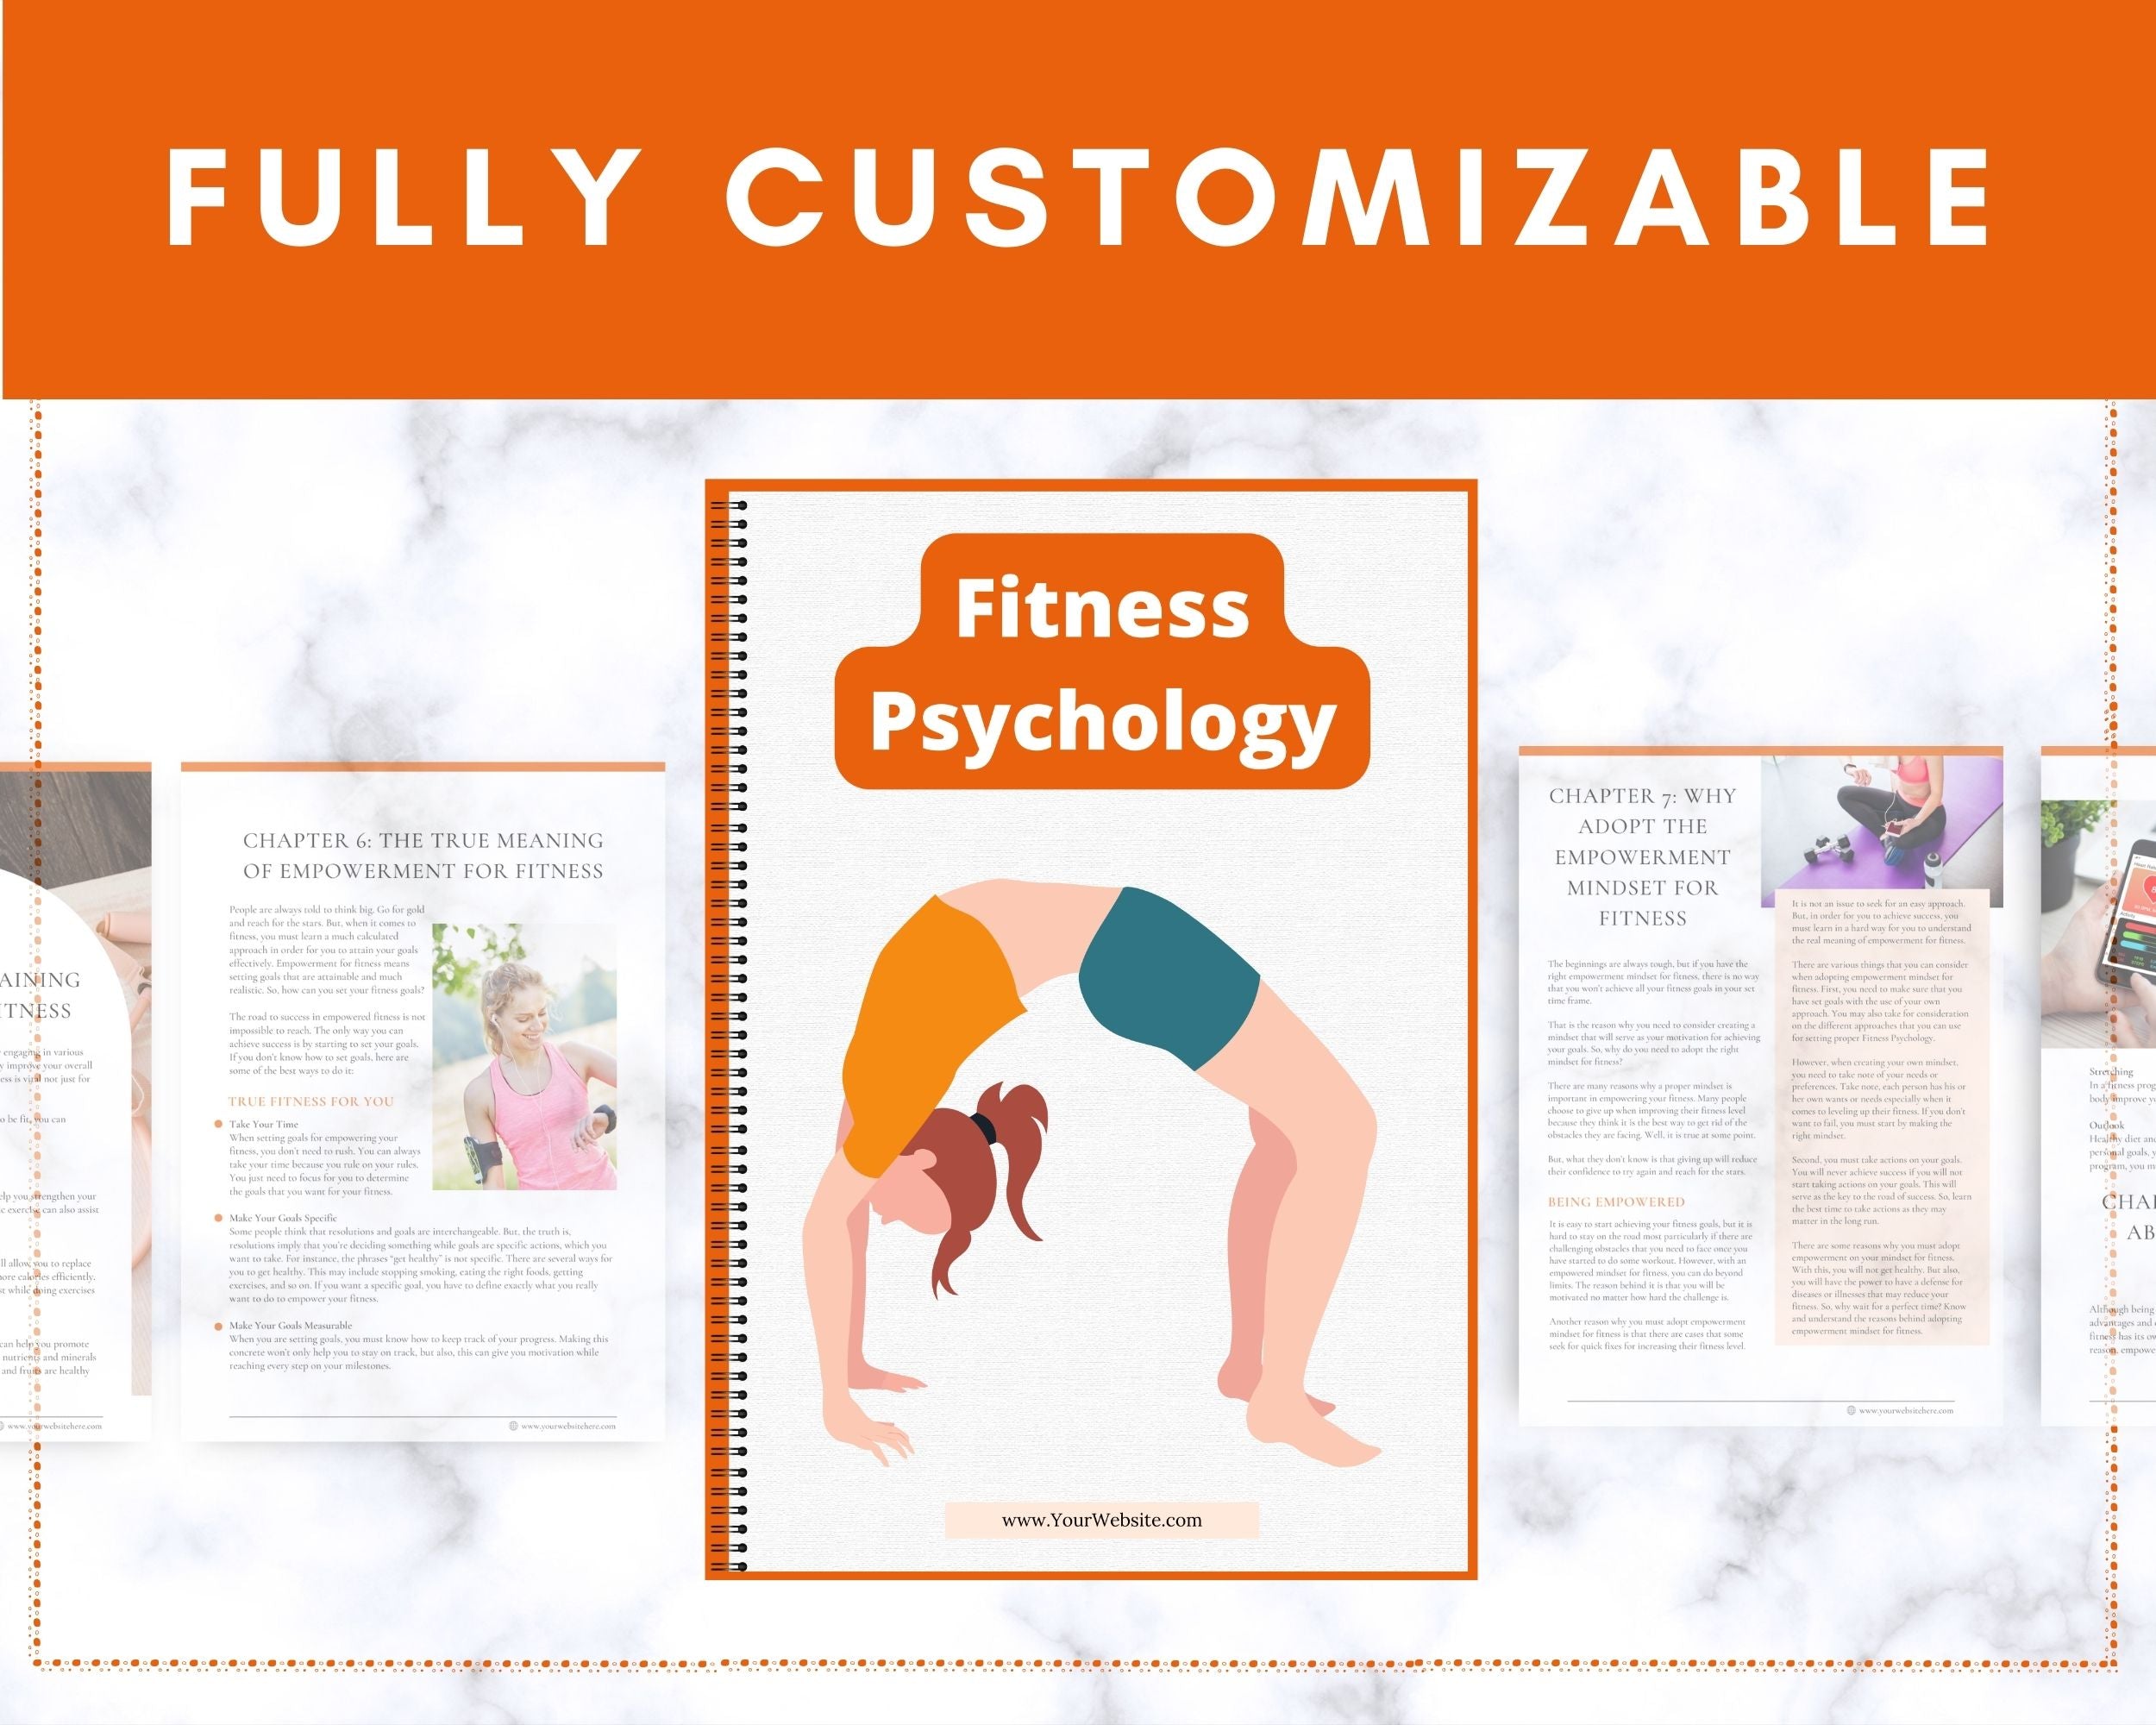 Editable Fitness Psychology Ebook | Done-for-You Ebook in Canva | Rebrandable and Resizable Canva Template